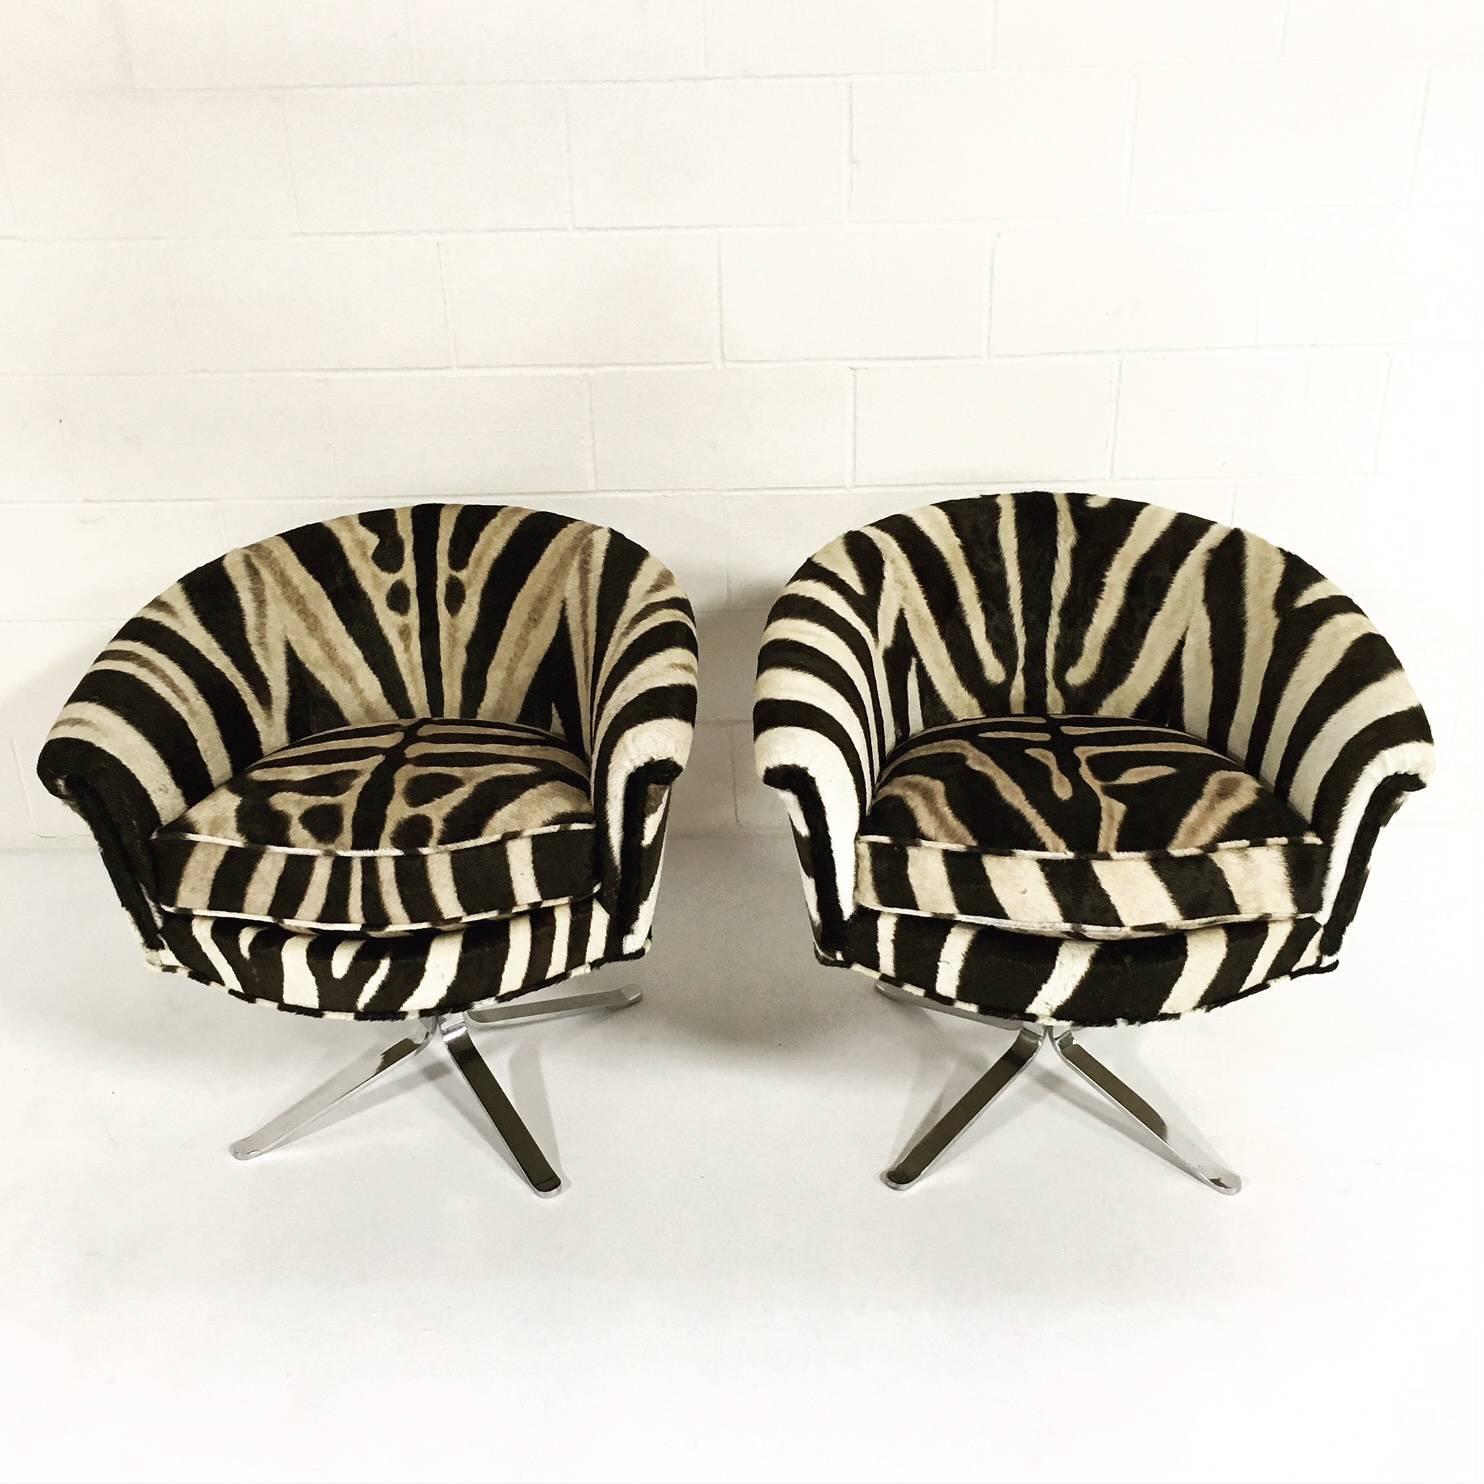 Pair of Swivel Chairs in Zebra Hide by Pace, in the manner of I.M. Rosen 3